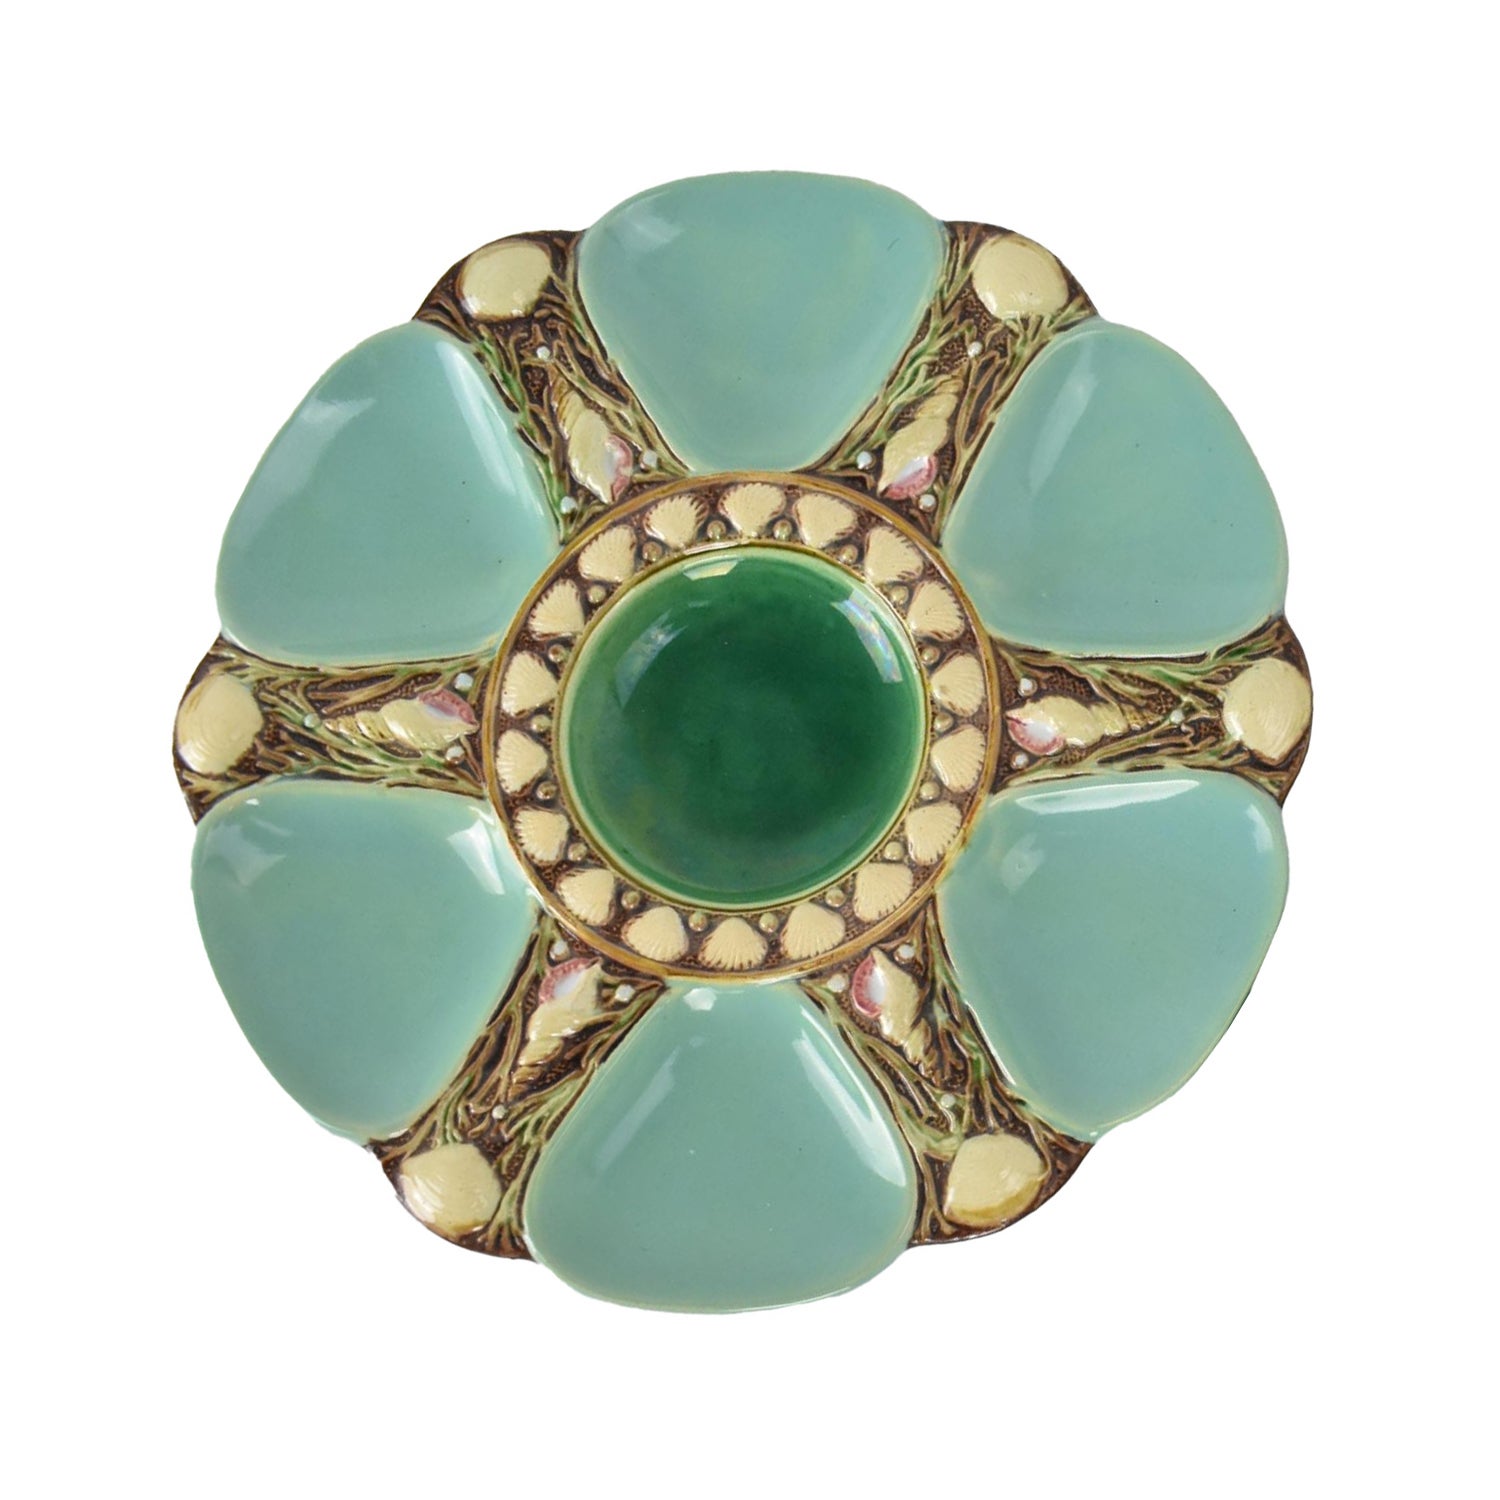 These Minton majolica oyster plates were produced in different colors. Delicate turquoise color with iridescent green tones on the middle of the plate. Decorated with refined shells, perfect to evoke a marine atmosphere. Each plate is stamped below